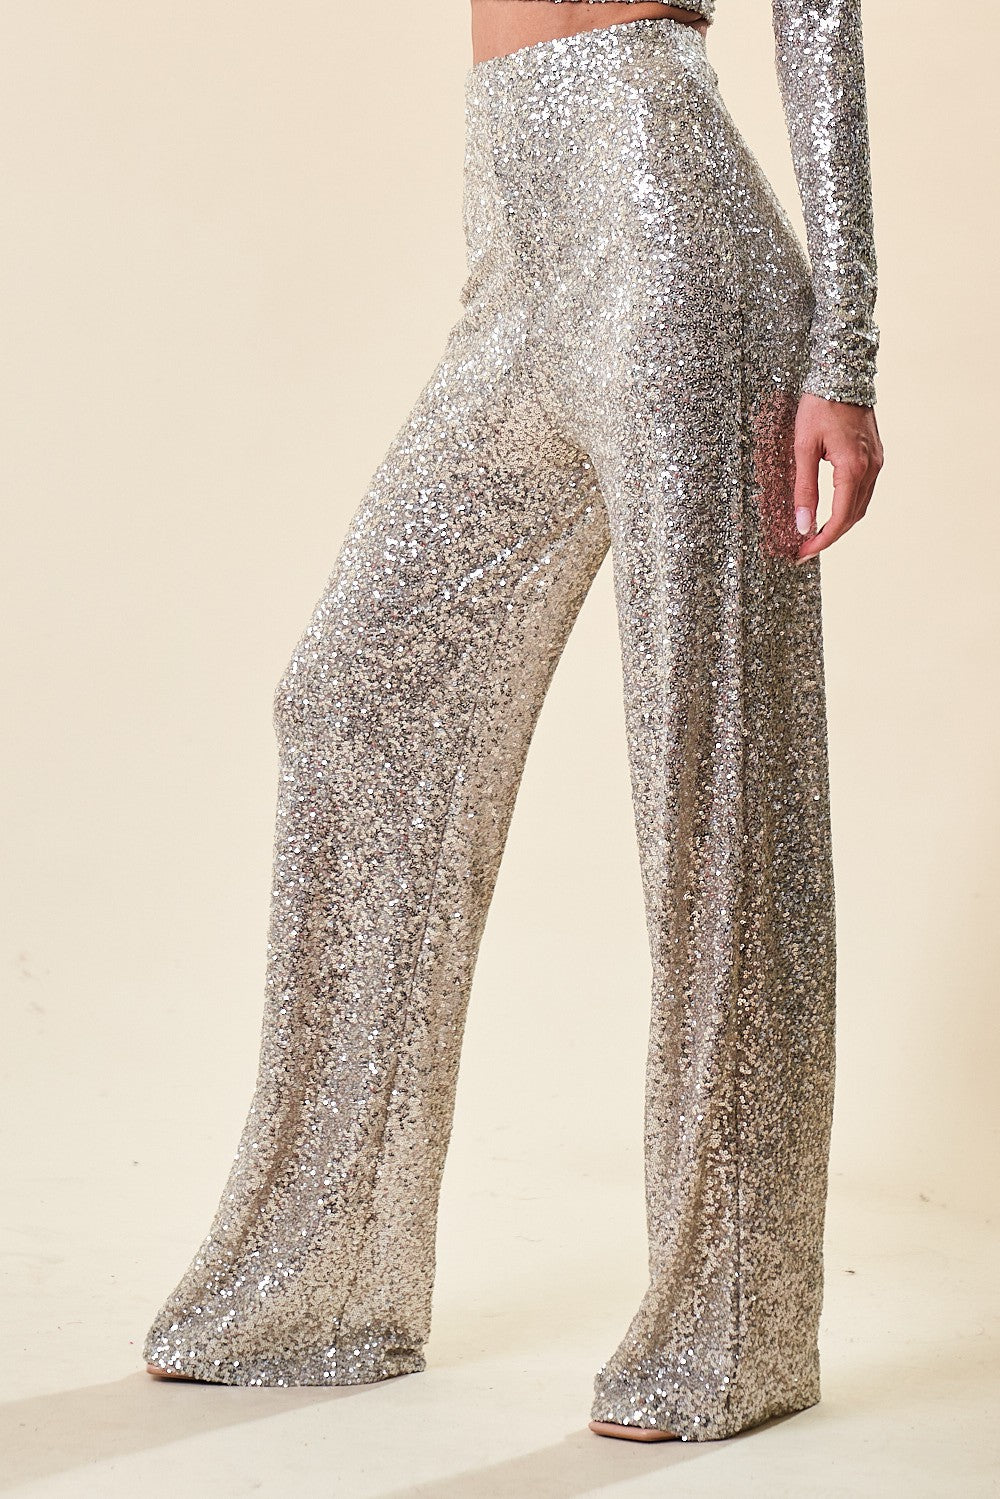 Nude High Waisted Sequin Pants